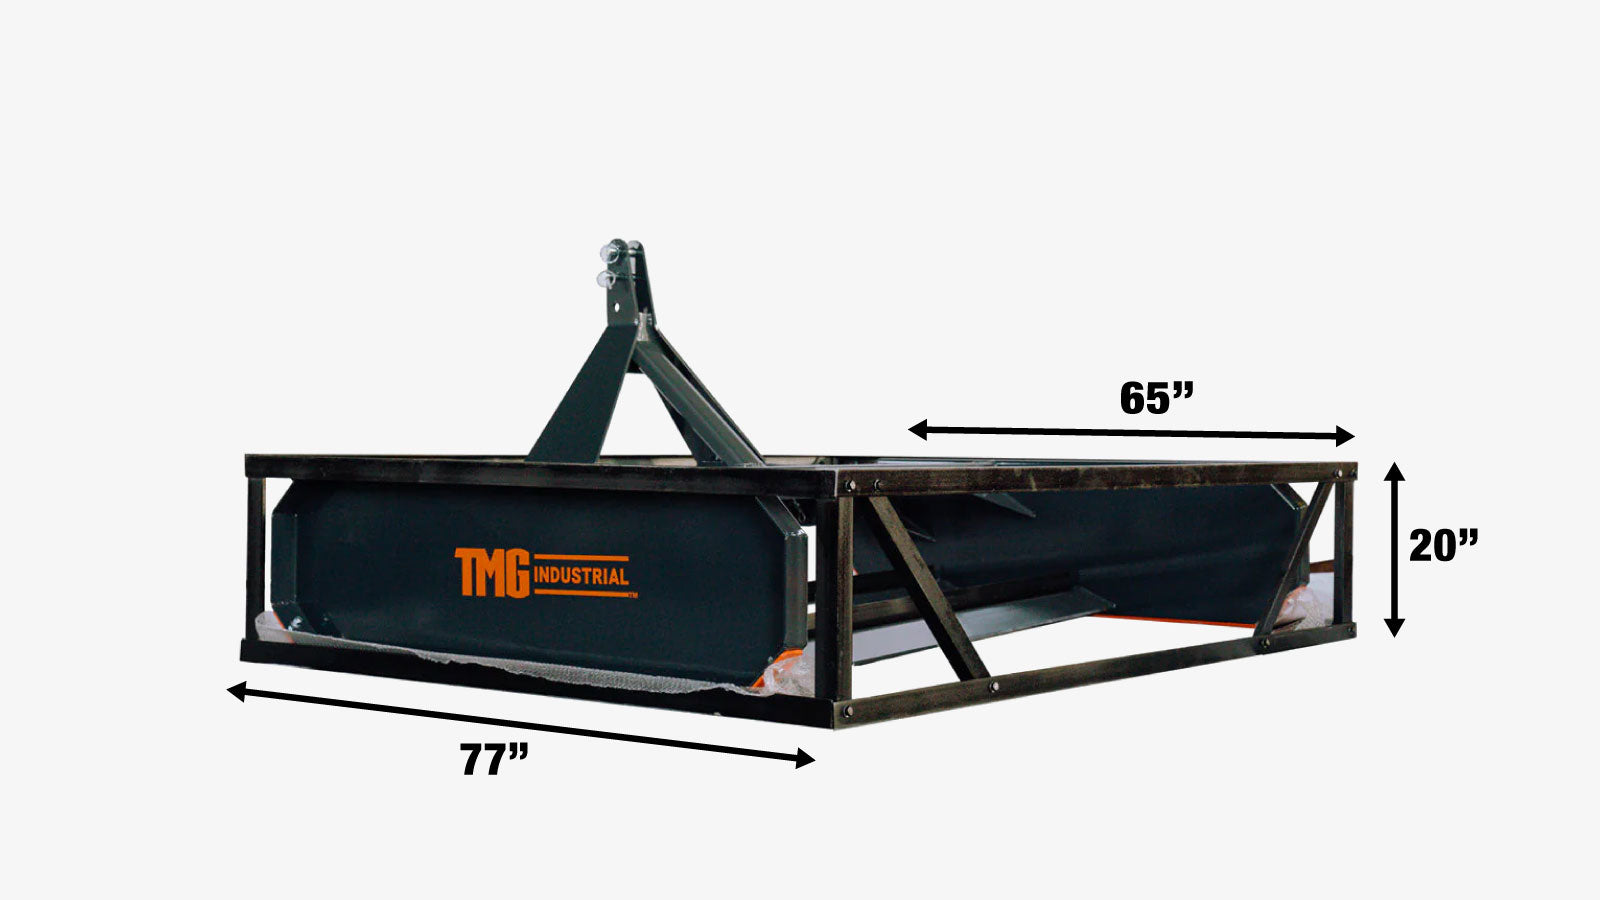 TMG Industrial 72” Tractor Land Leveler, 3-Point Hitch, 70” Grading Width, Adjustable Depth, Double Edge Blades, Category 1 & 2, TMG-TLL72-shipping-info-image